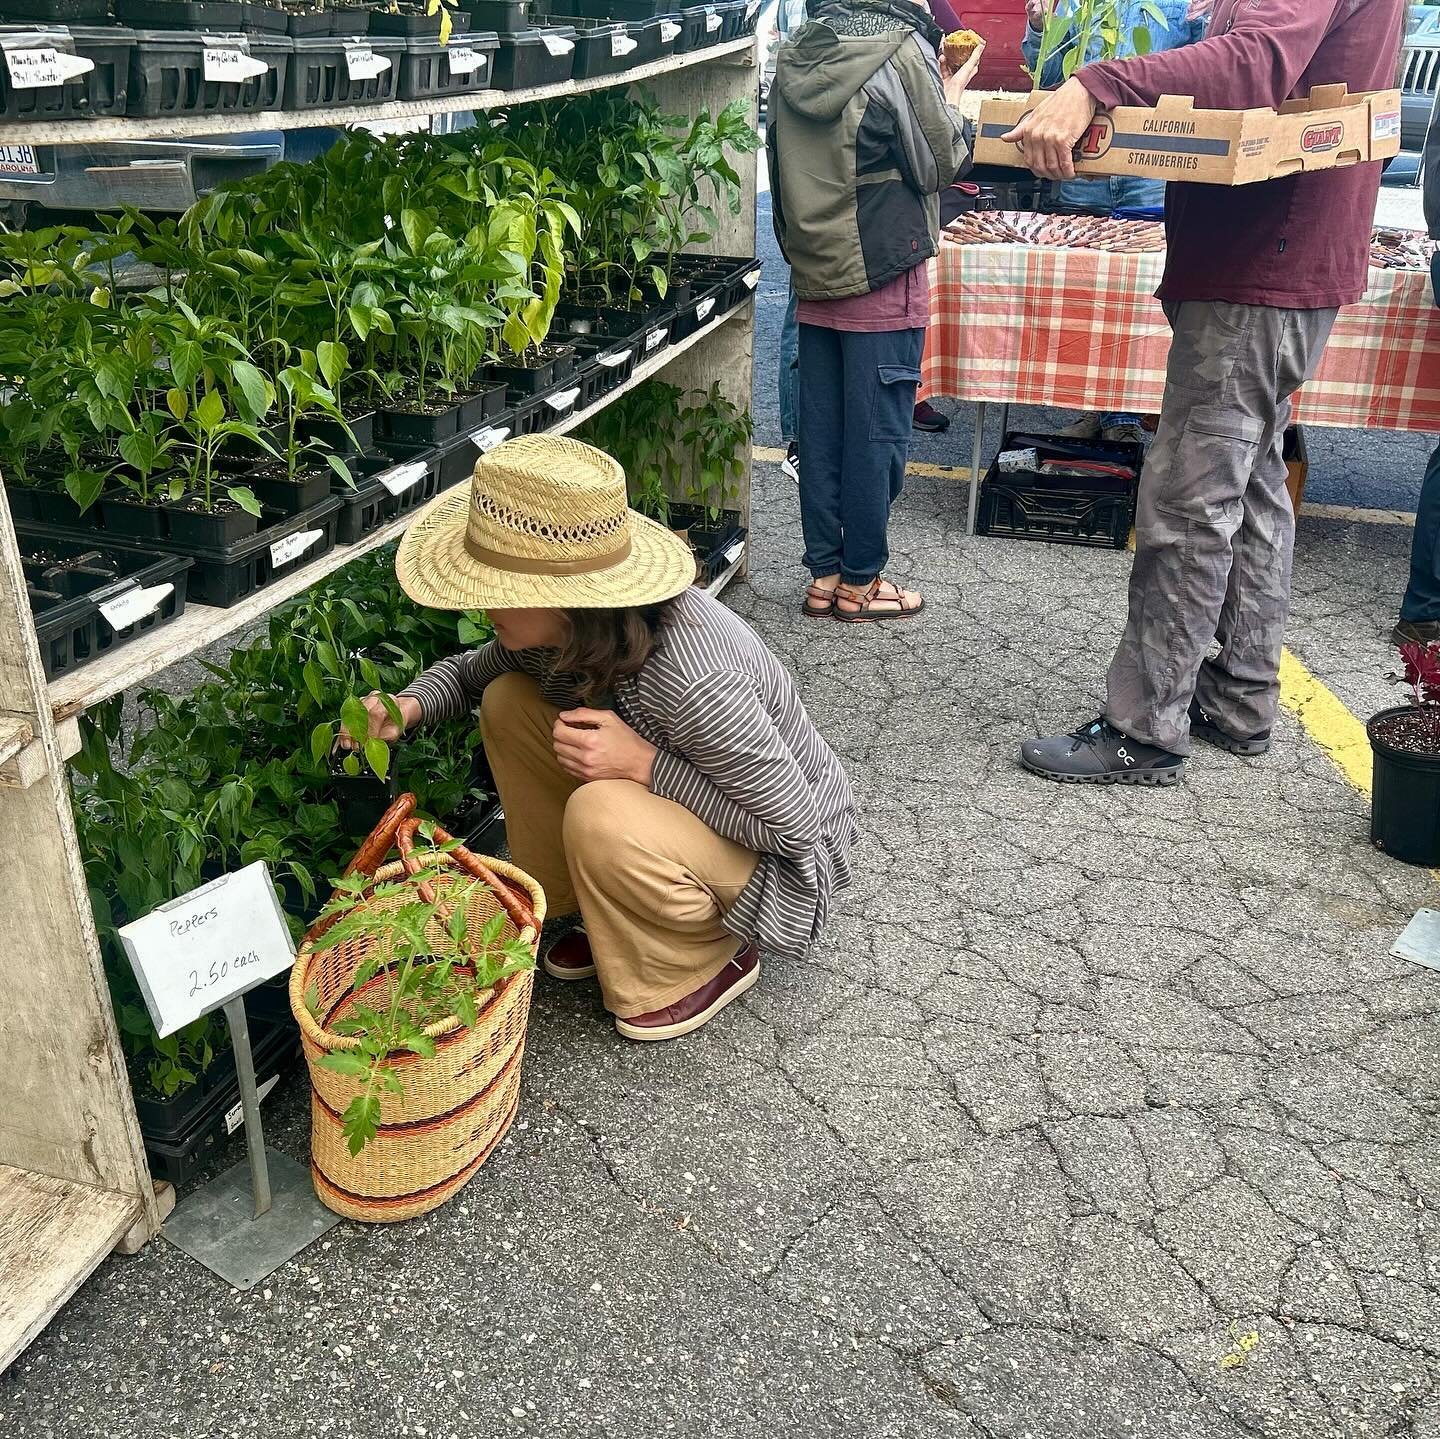 🎉💃🏻We are having a great time out here at the Market this morning, and we&rsquo;ve got the perfect gifts for your Mom, your grad or yourself! 🎁And if you&rsquo;re a gardener you know Mother&rsquo;s Day also means that it&rsquo;s safe to plant you